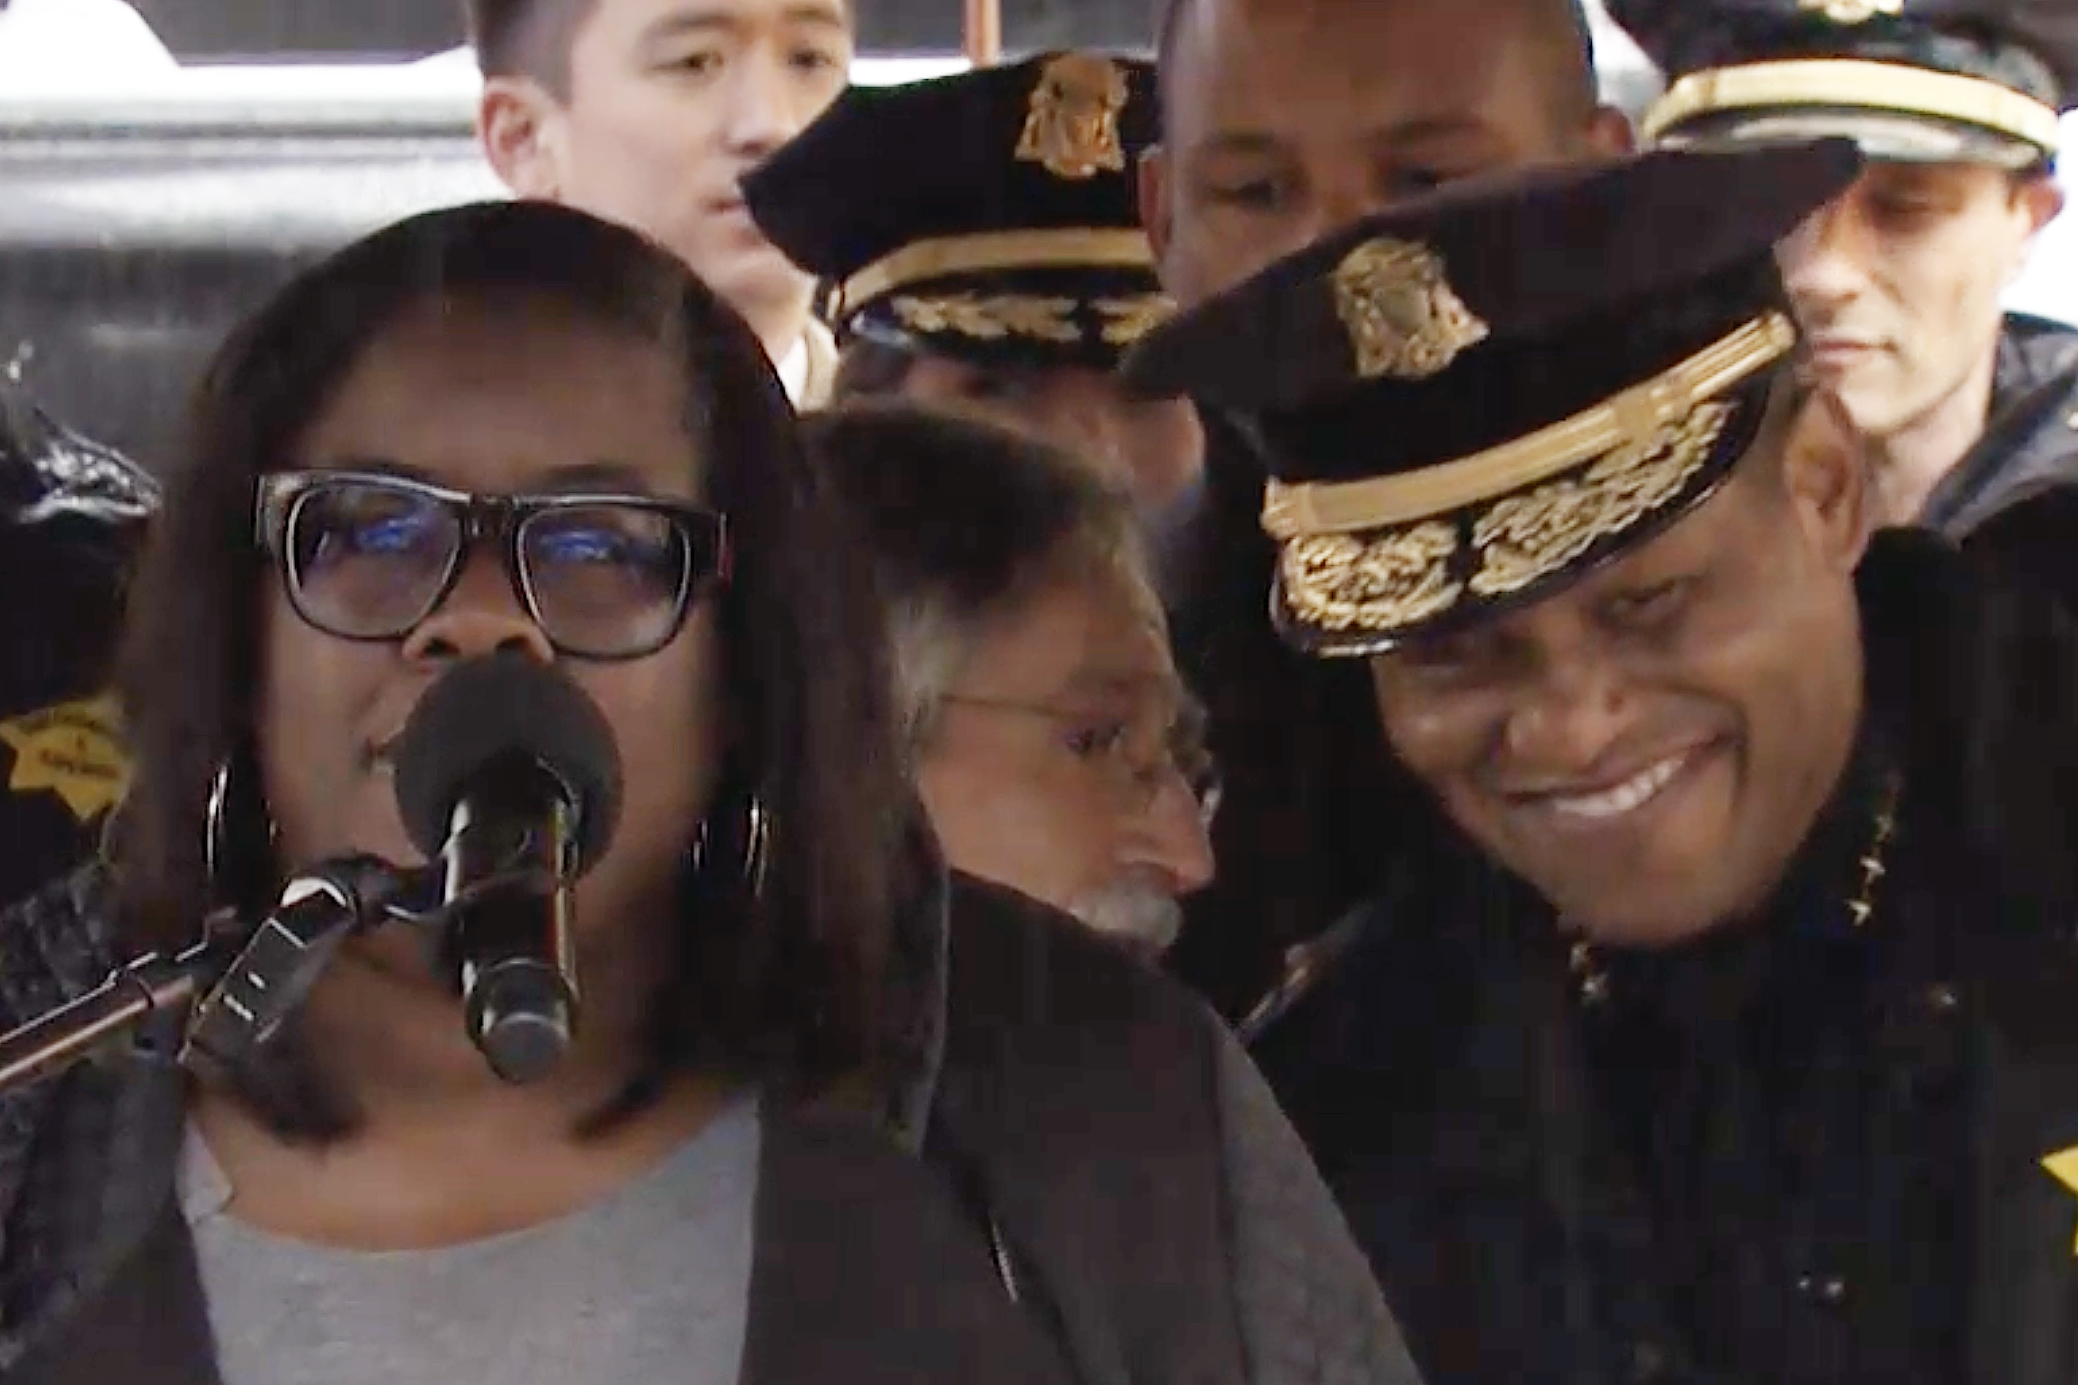 People at a press conference, with a woman at the microphone and a man behind her speaking with a police chief.